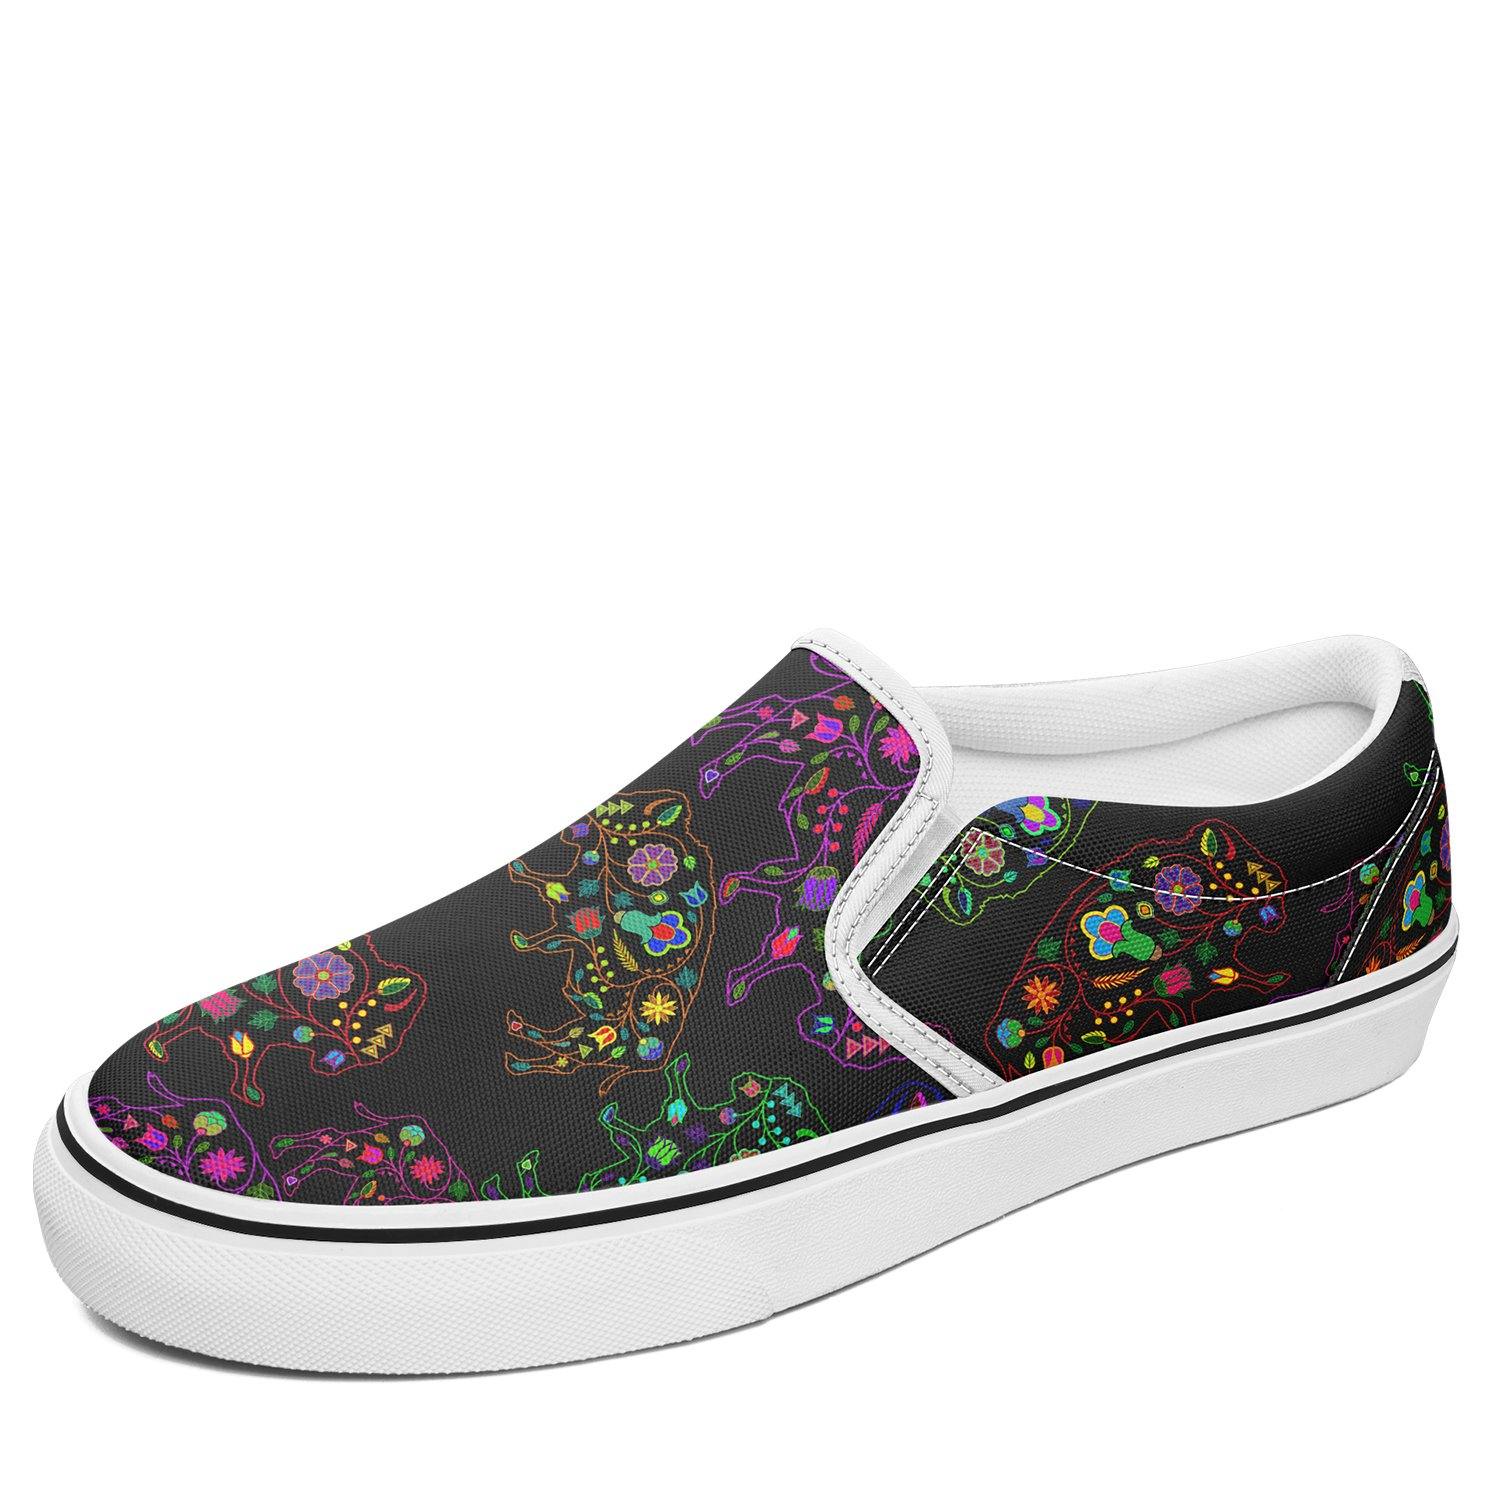 Floral Buffalo Otoyimm Canvas Slip On Shoes otoyimm Herman US Youth 1 / EUR 32 White Sole 